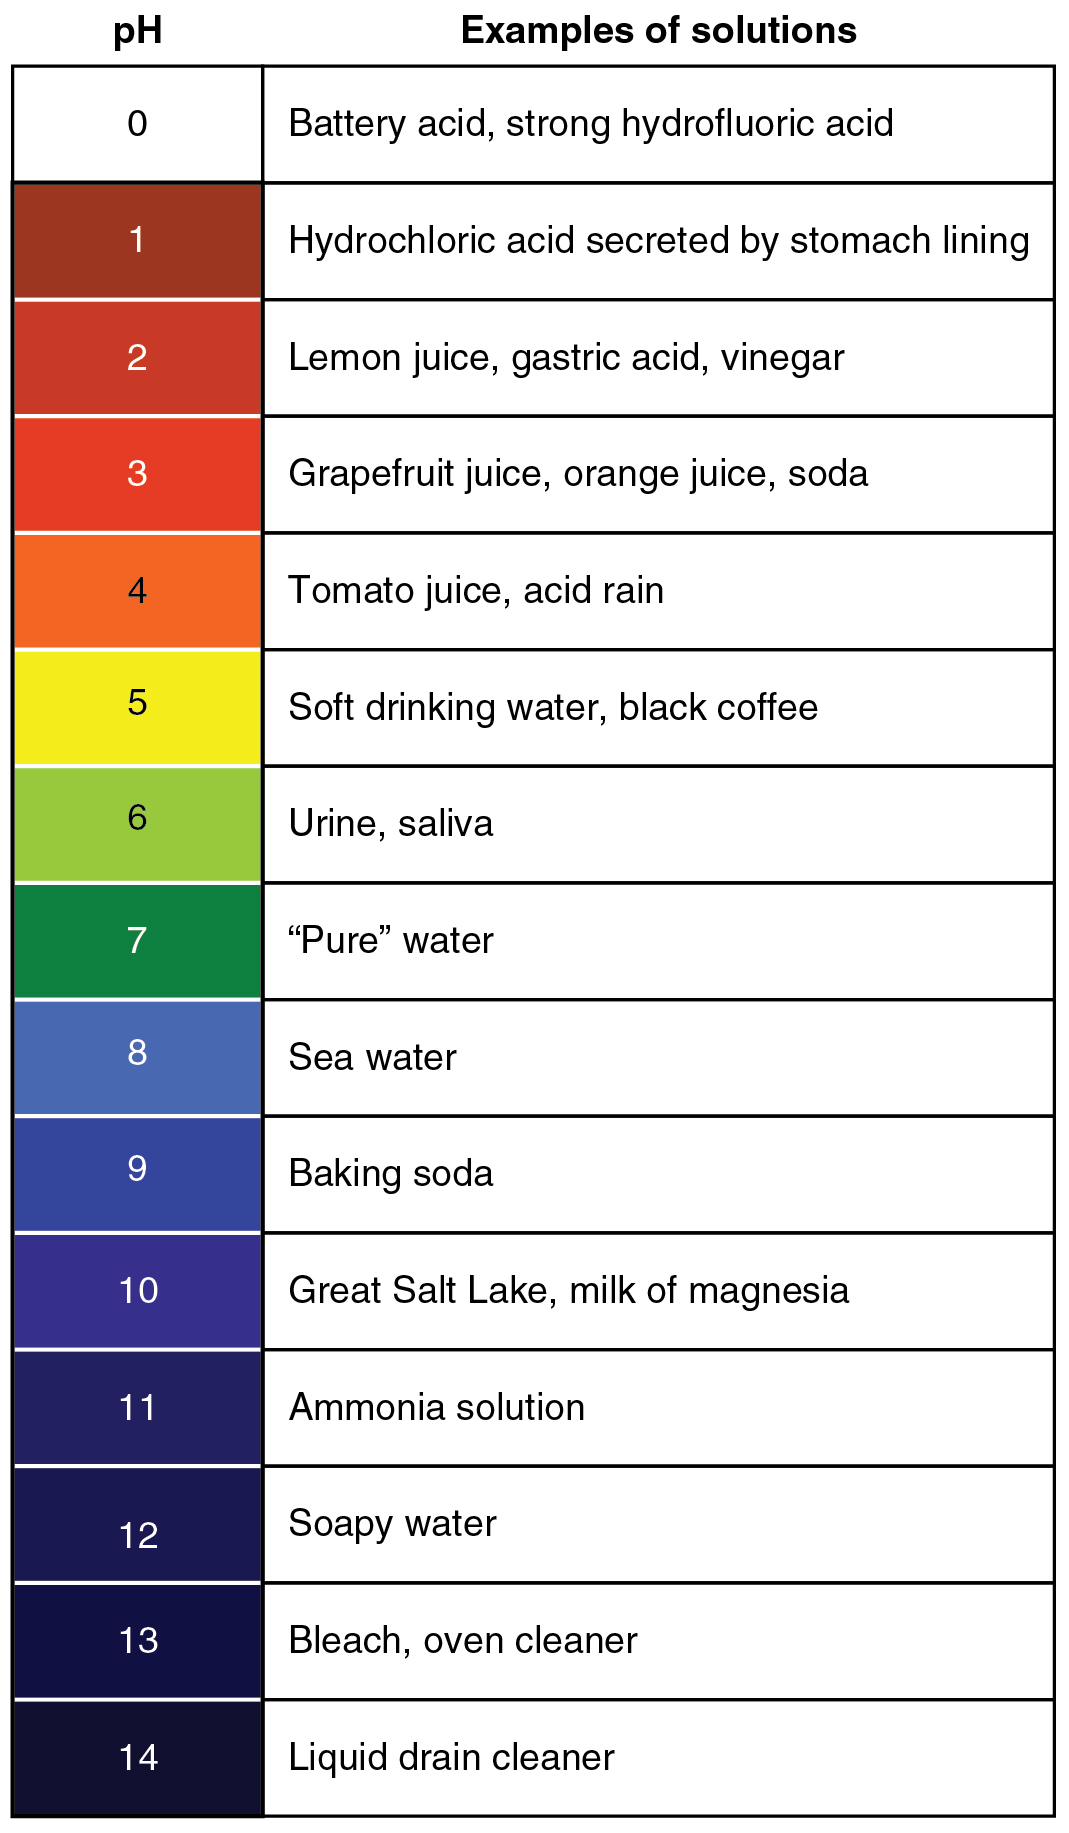 Image of the pH scale and examples of substances for each of the numbers on the scale.